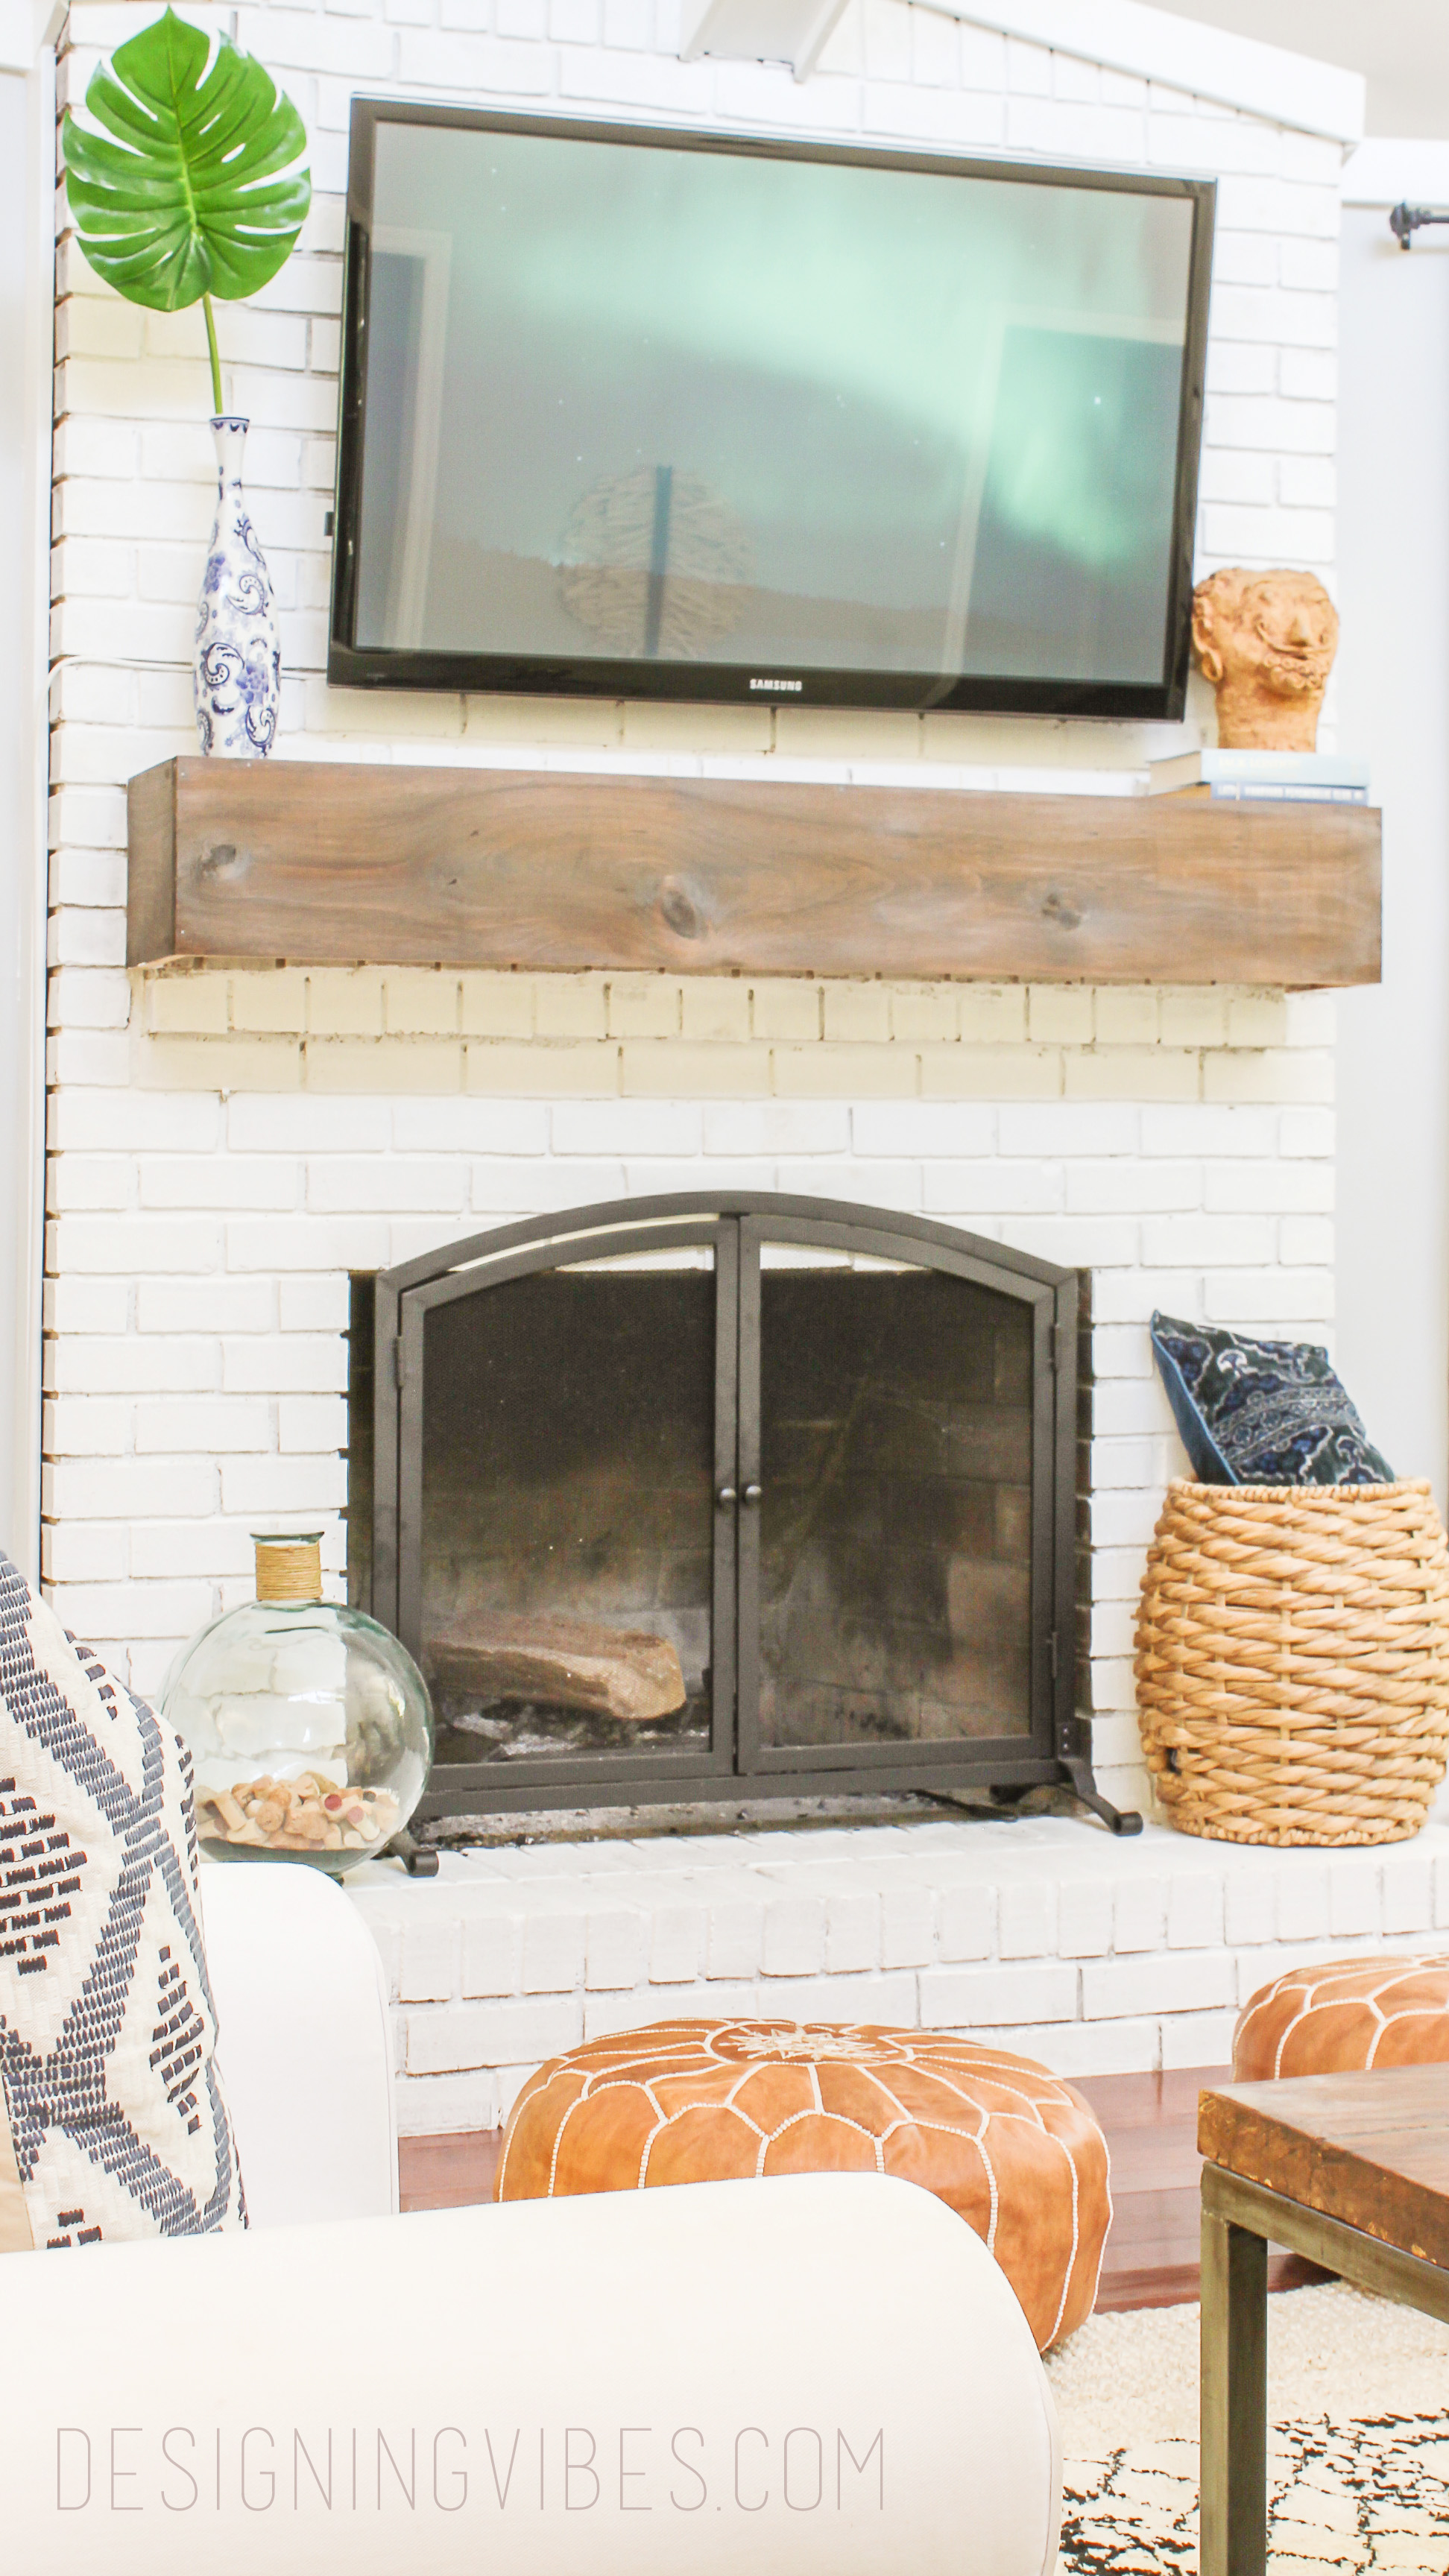 review of my painted brick fireplace 3 years later